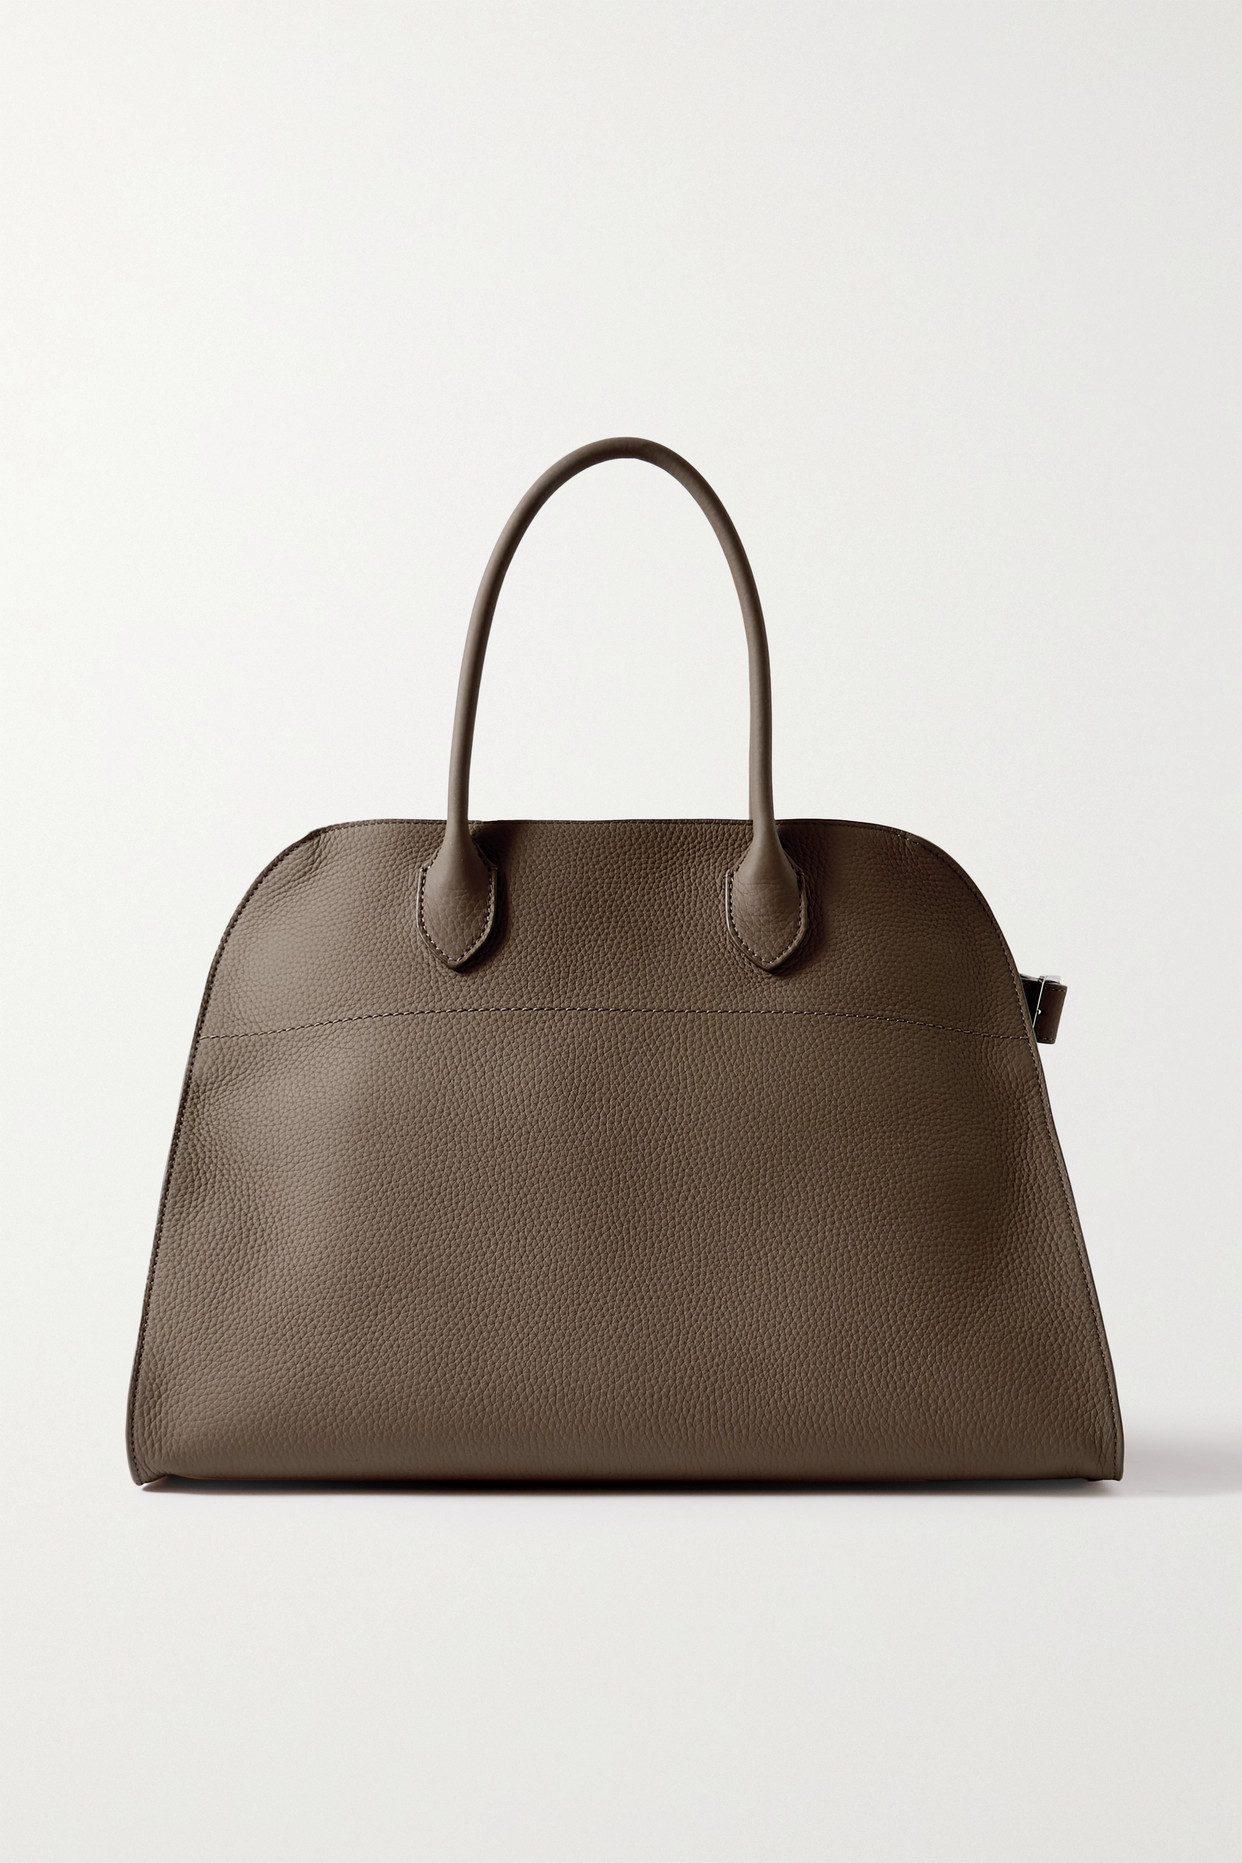 Margaux 15 Air Buckled Textured-Leather Tote